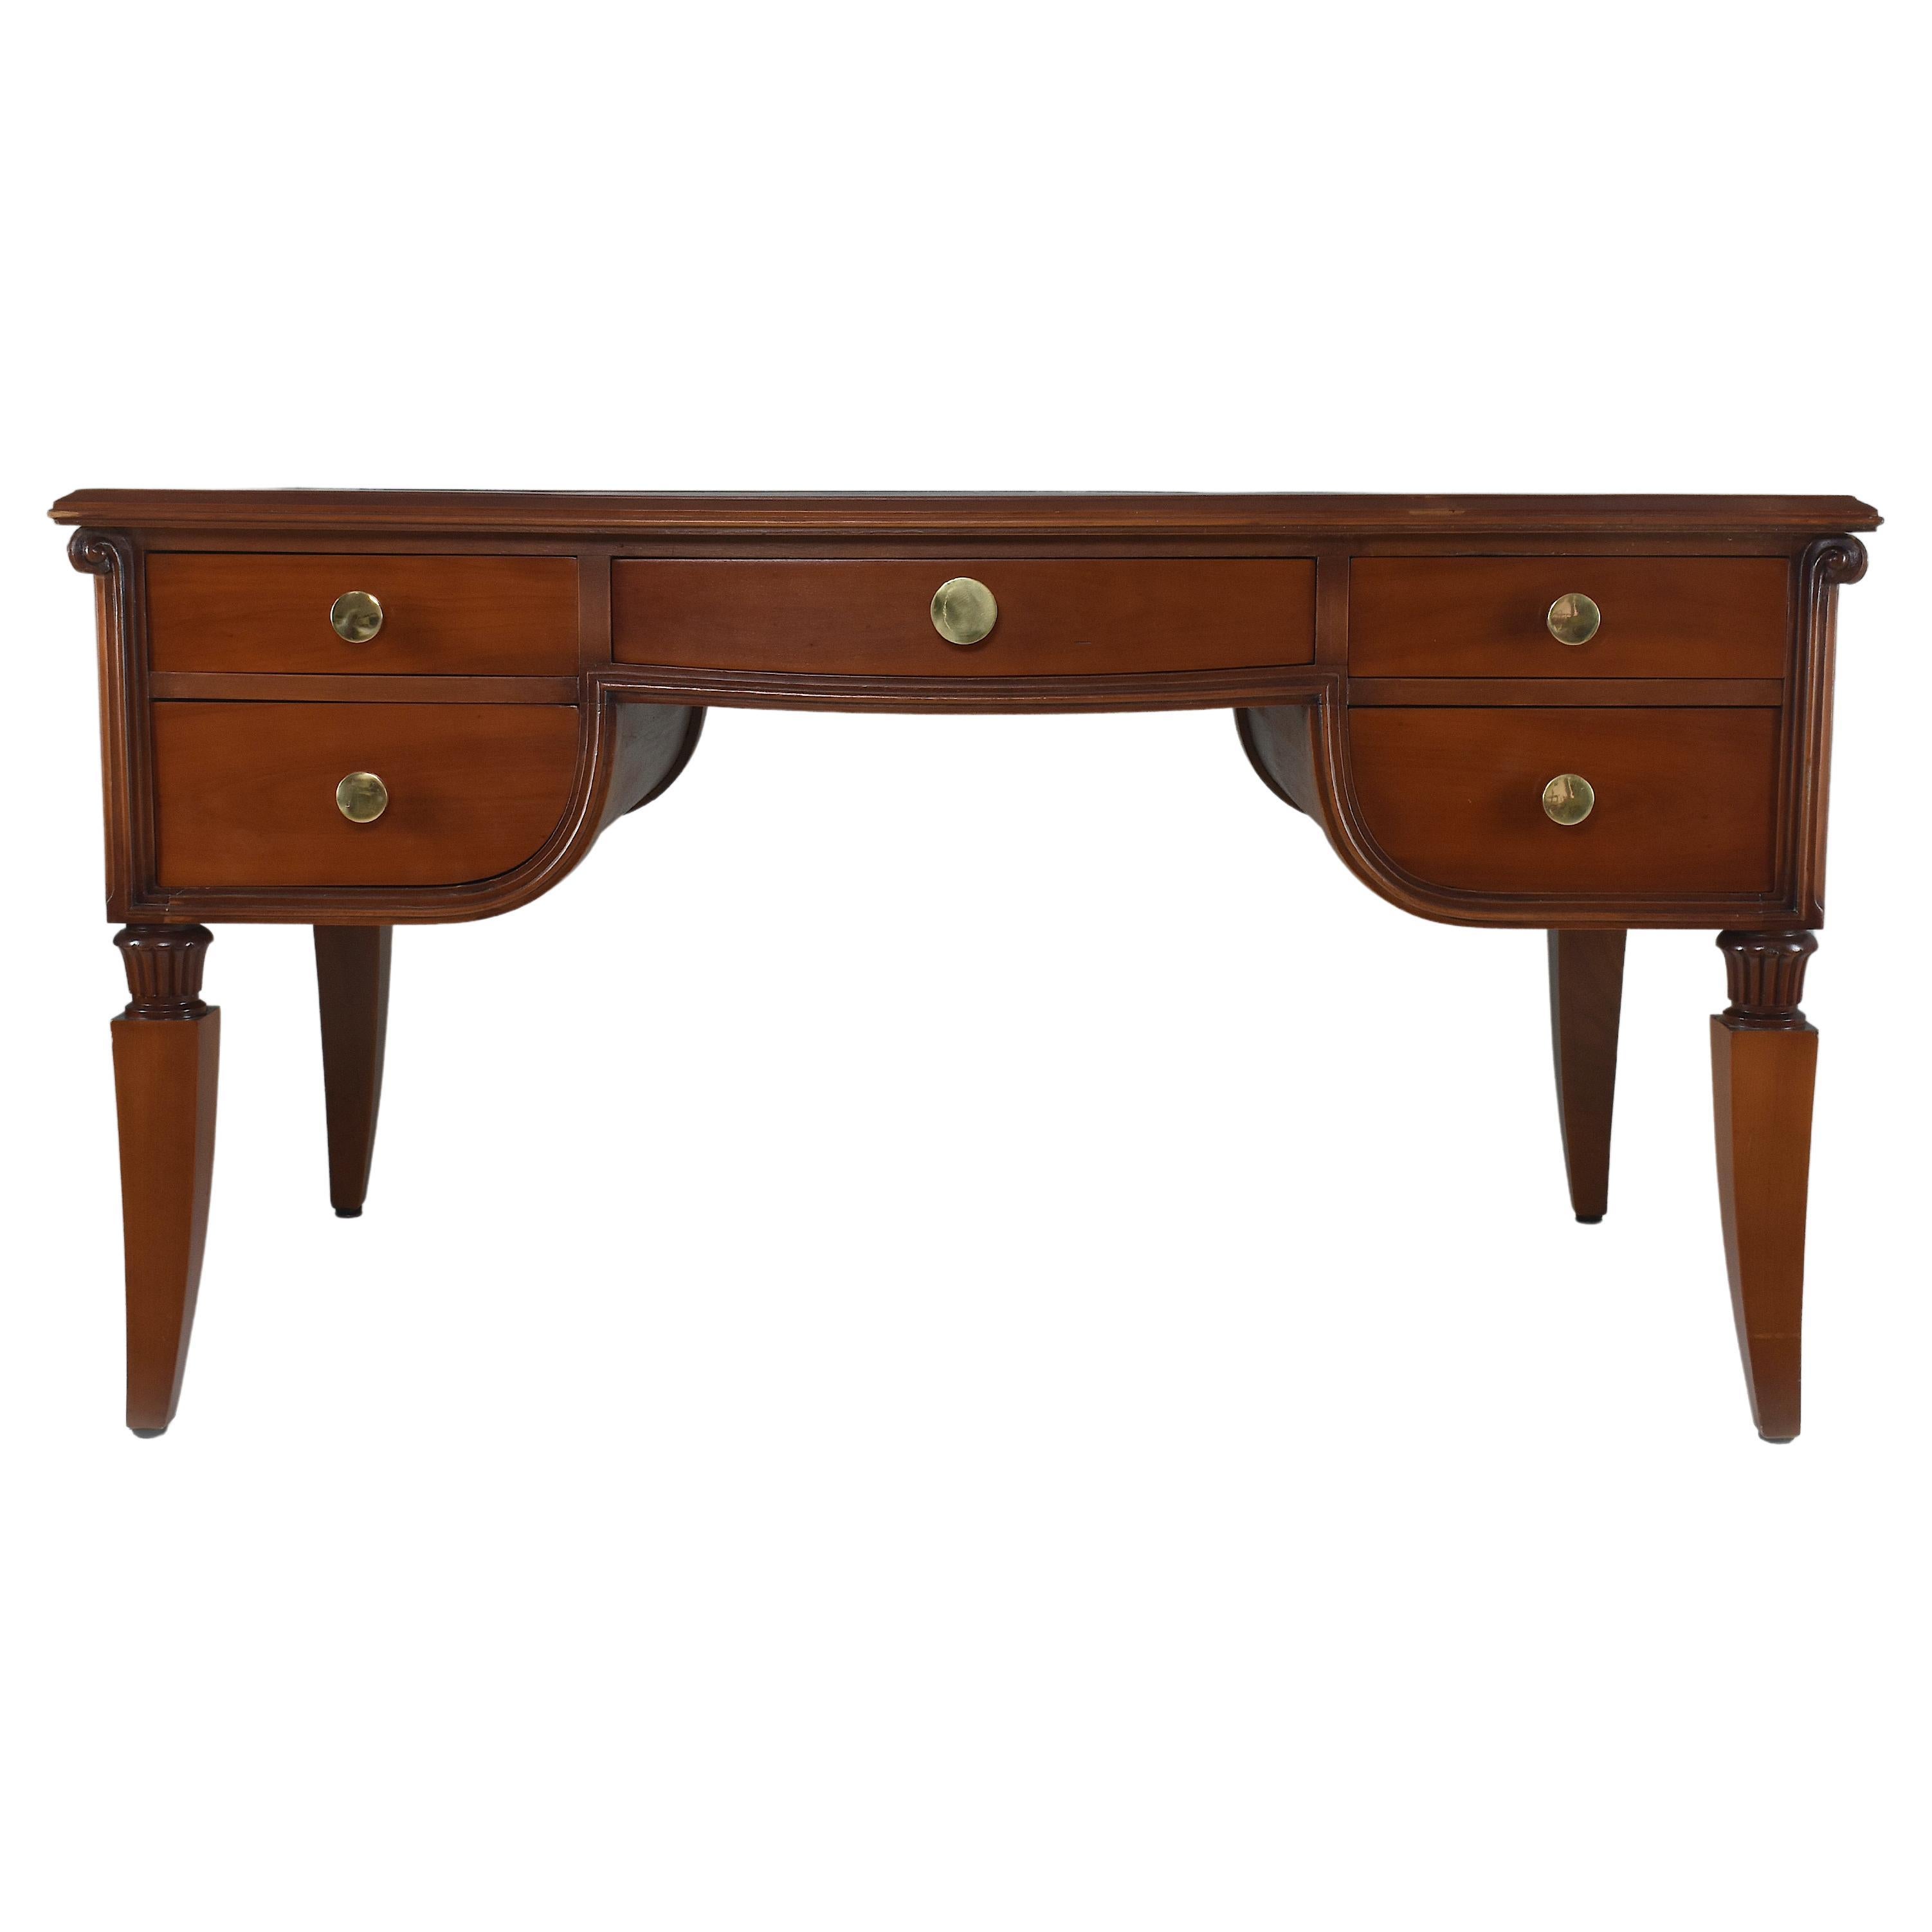 1940's Art Deco French Oak and Leather Desk